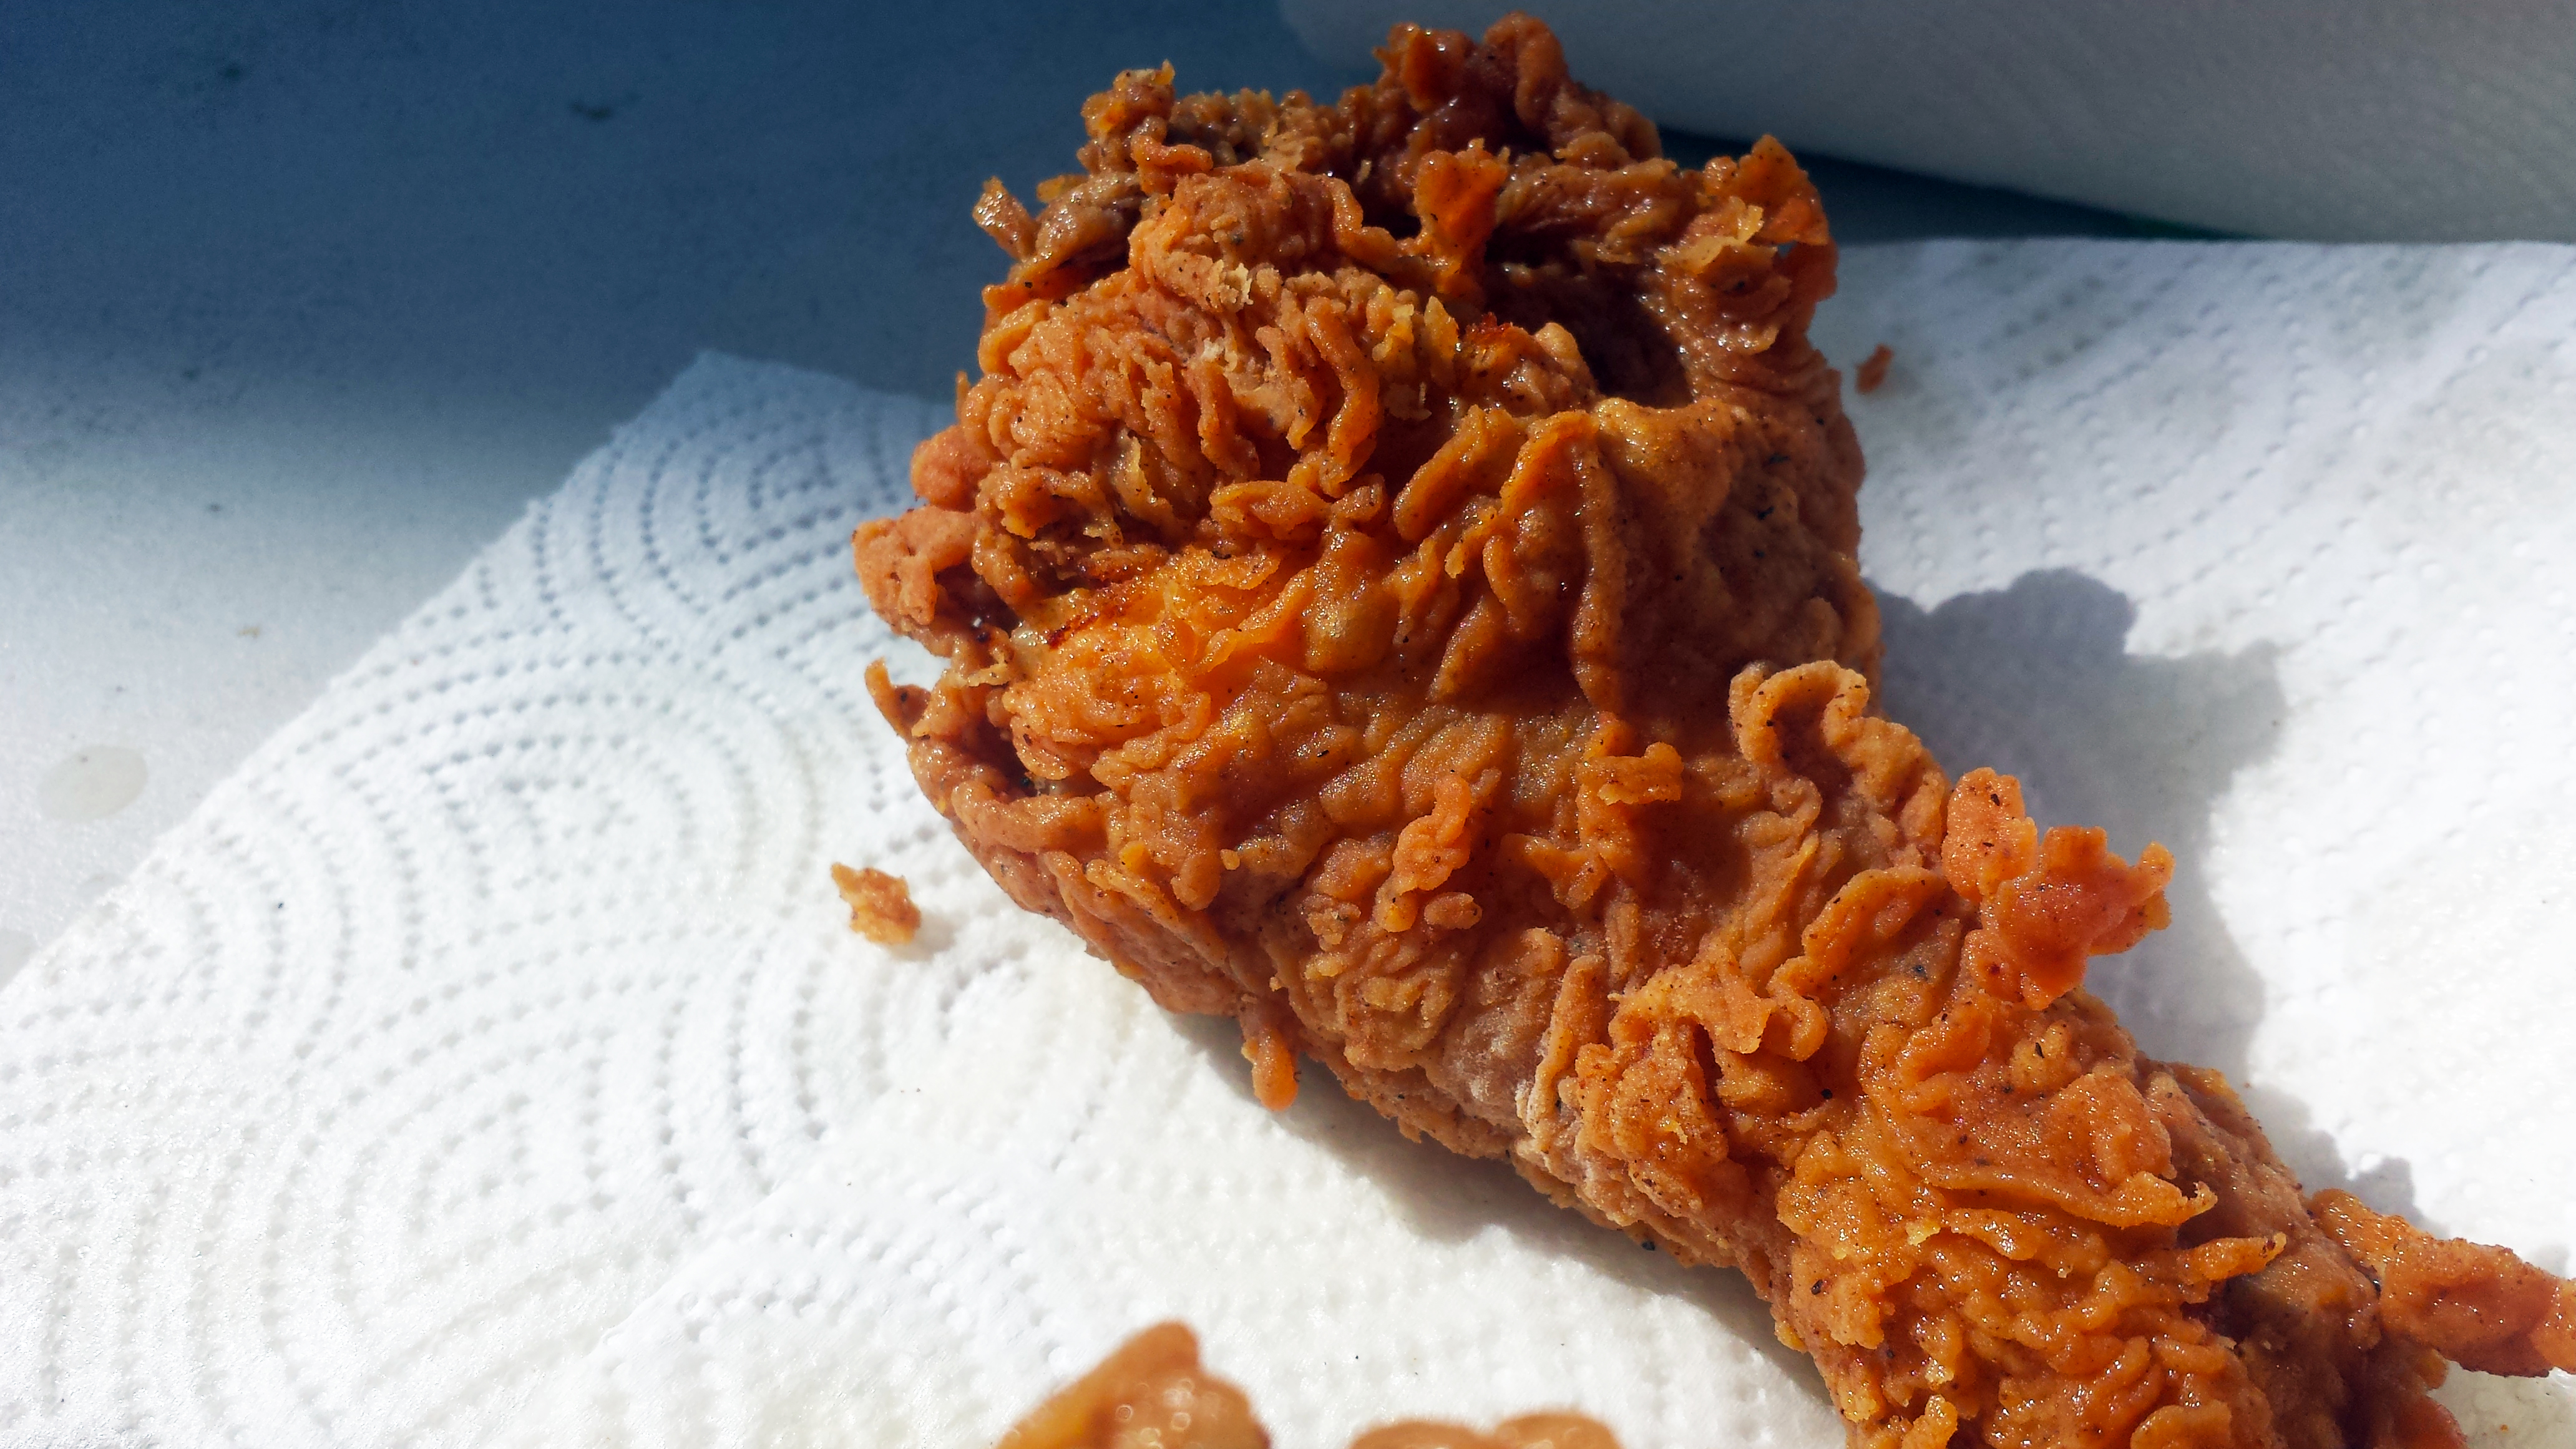 http://knucklesalad.com/wp-content/uploads/2015/03/perfect-popeyes-spicy-chicken.jpg